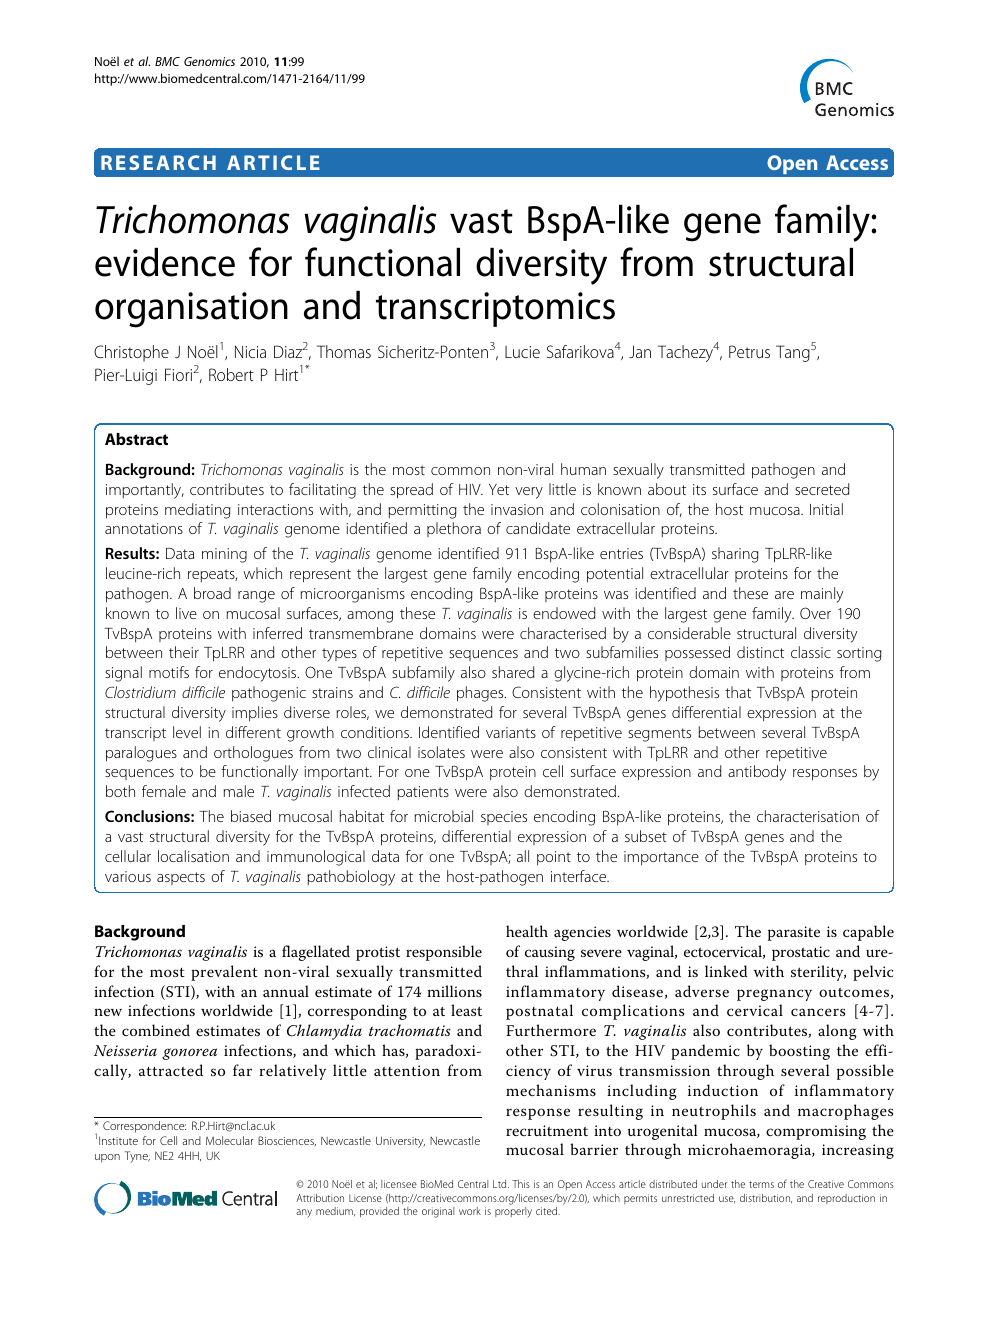 Trichomonas Vaginalis Vast Bspa Like Gene Family Evidence For Functional Diversity From Structural Organisation And Transcriptomics Topic Of Research Paper In Biological Sciences Download Scholarly Article Pdf And Read For Free On